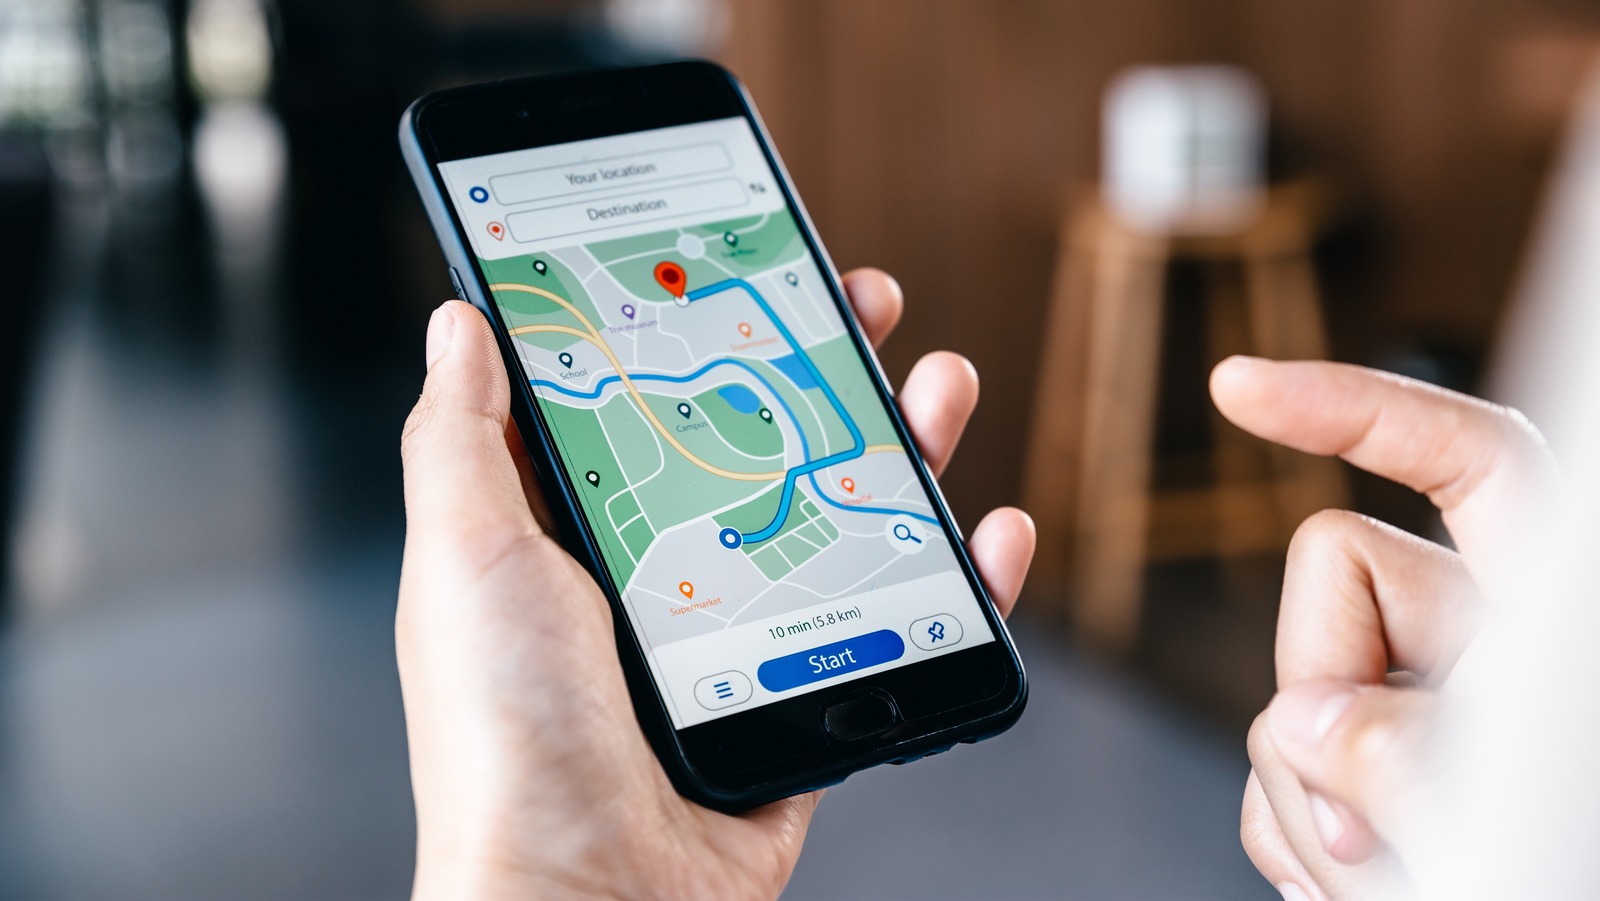 All The Most Popular Map Apps For Android Ranked Worst To Best – SlashGear